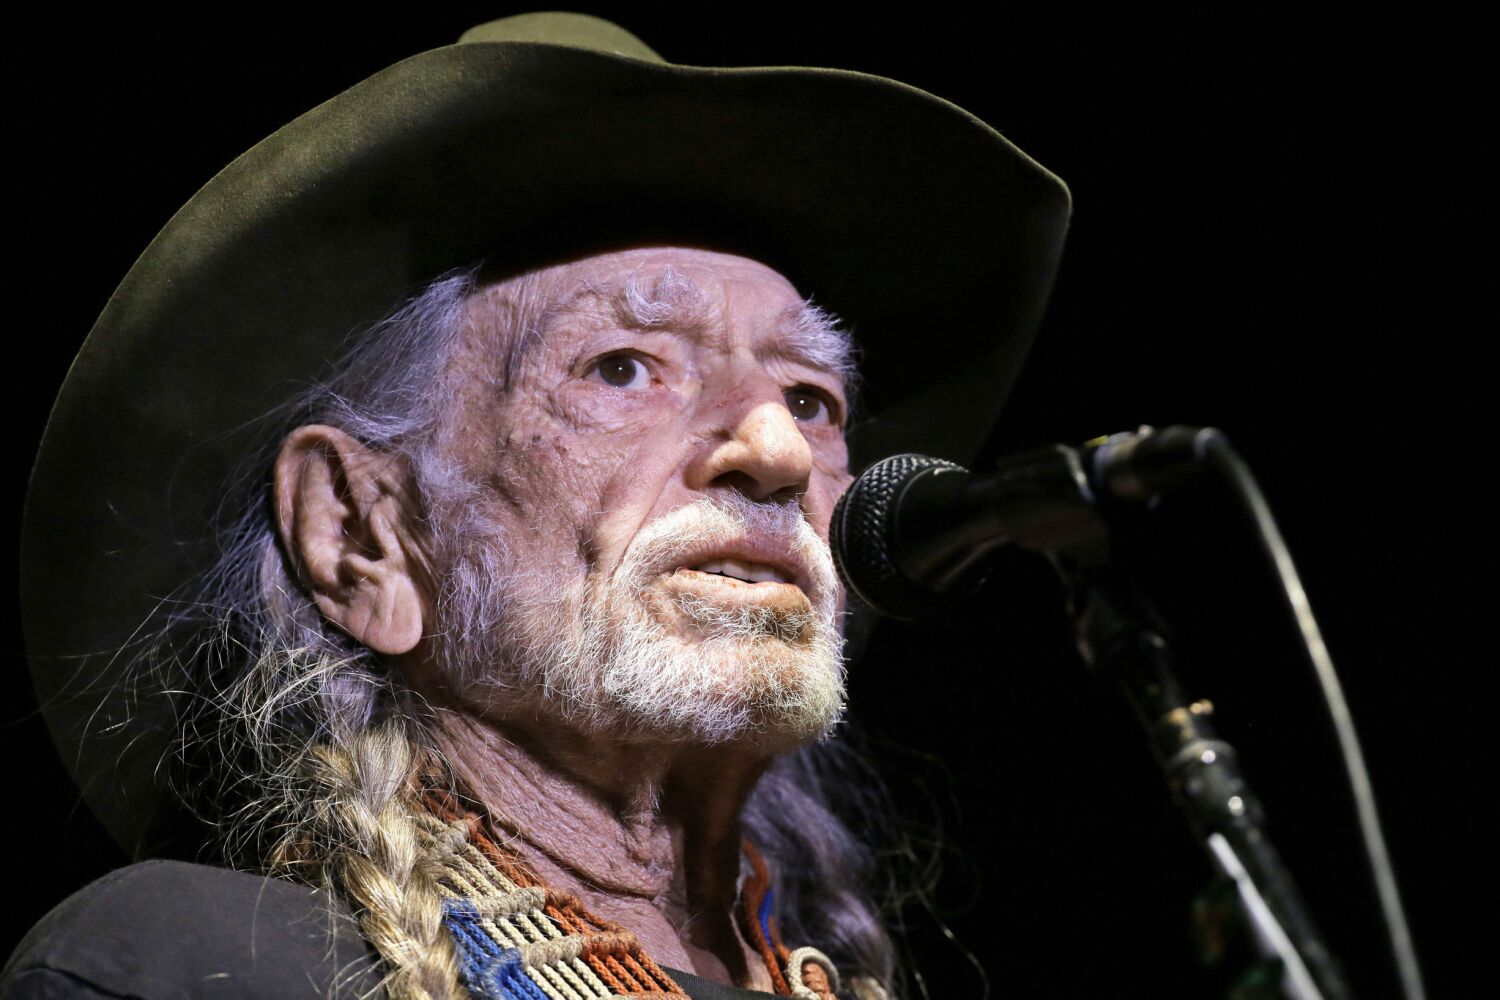 Willie Nelson turns 90 today, and dozens of famous artists will help him celebrate